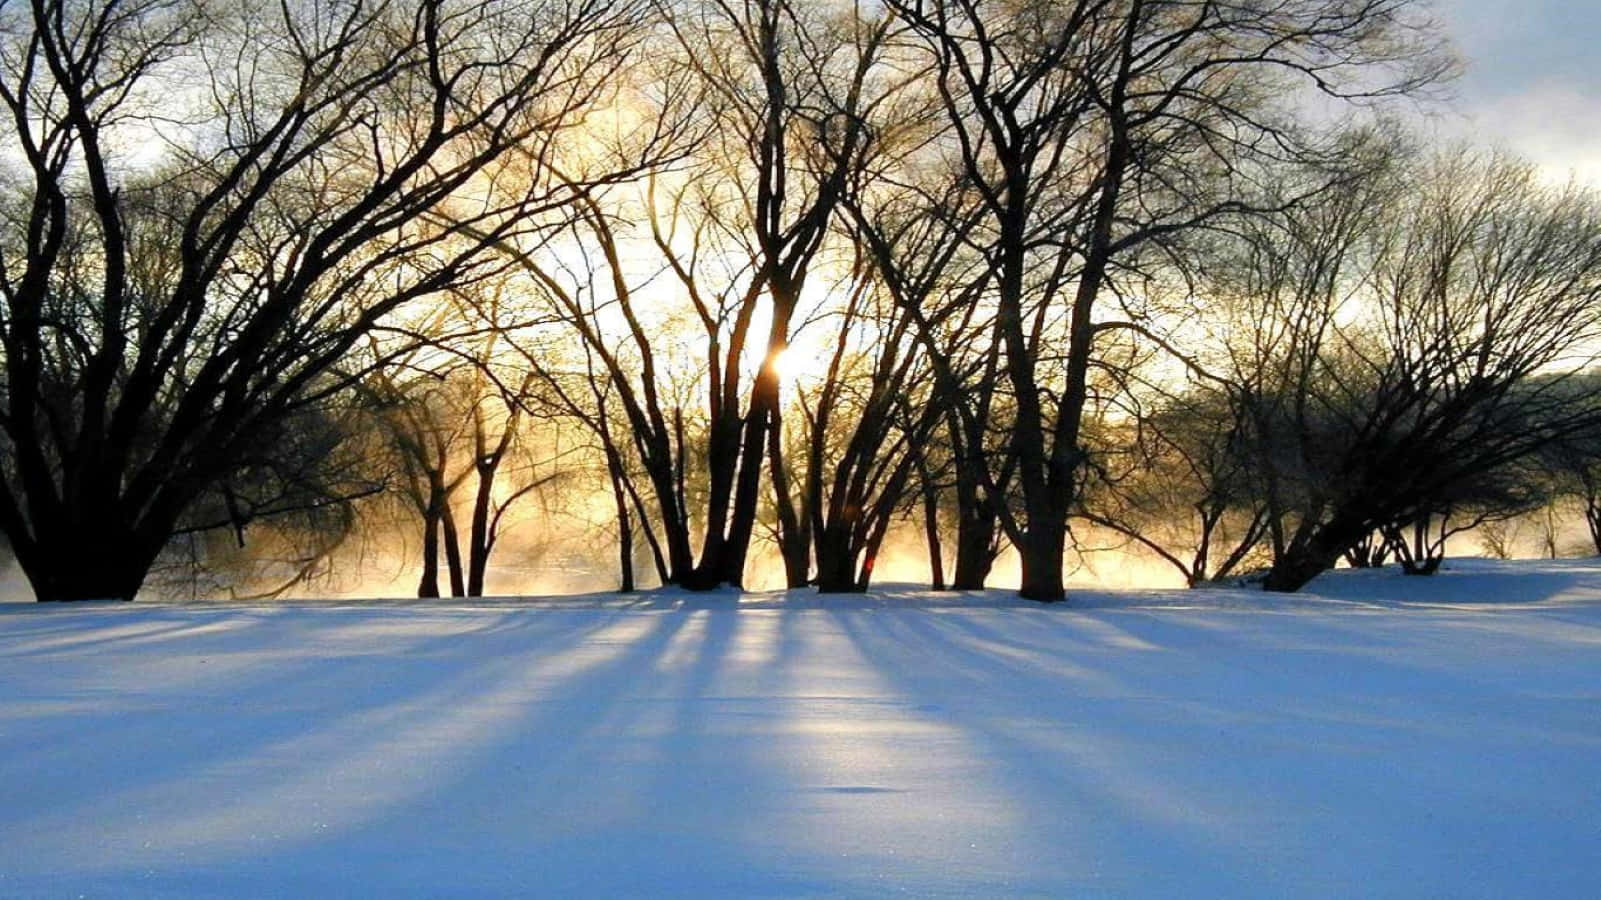 Celebrate The Winter Solstice With A Scenic Snowy Landscape Background